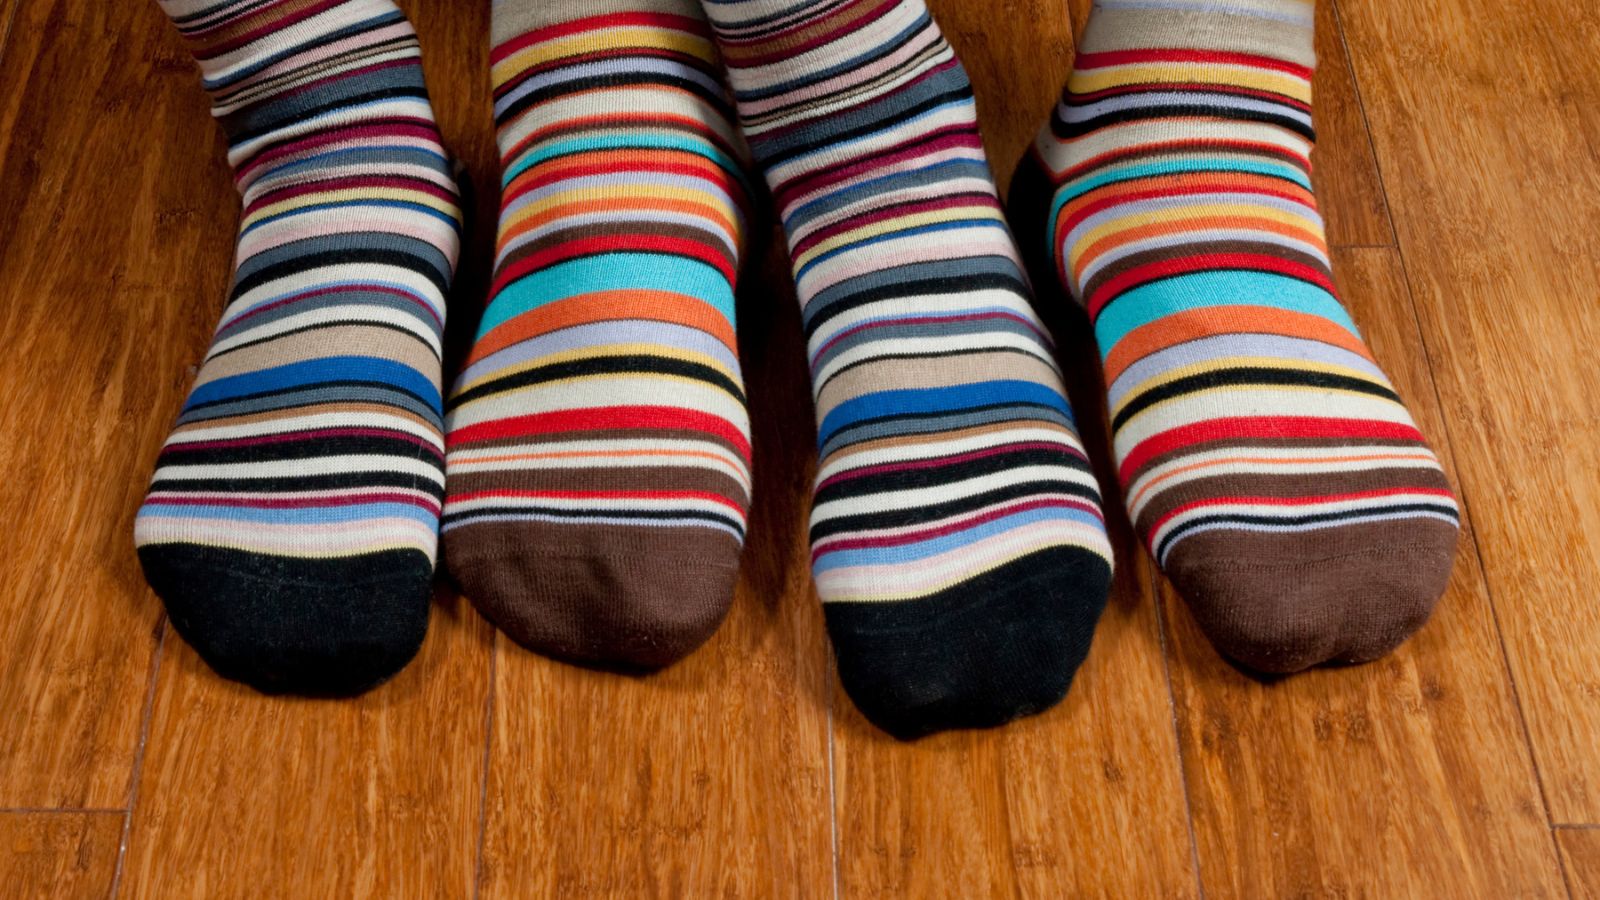 24 Ideas for What To Do With Old Socks